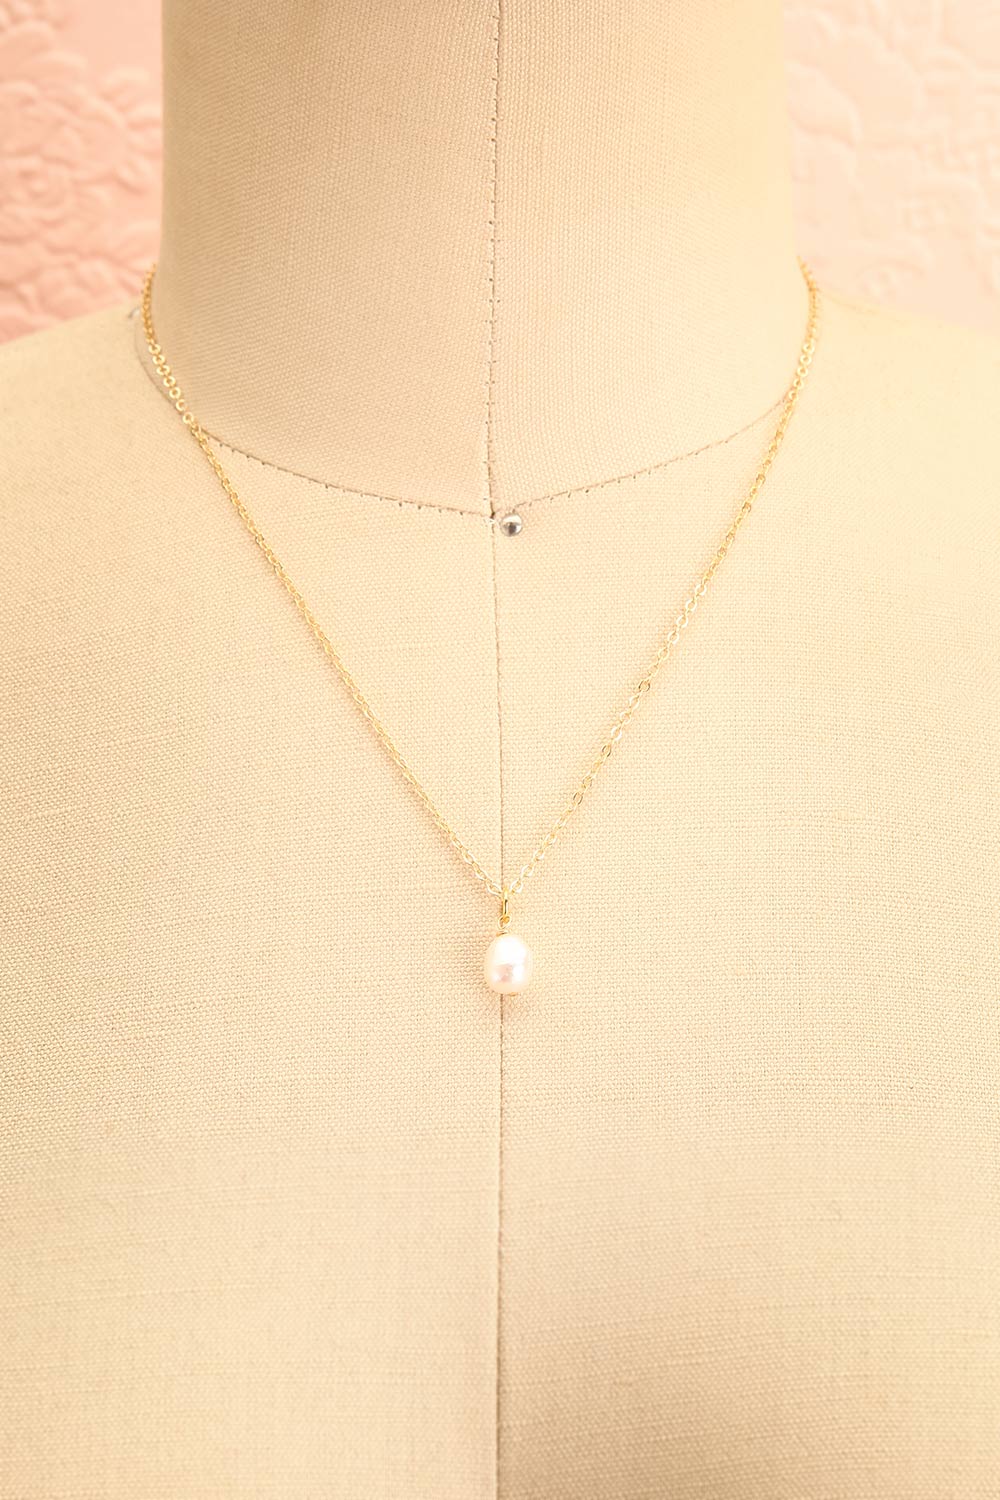 Opha May Johnson Water Pearl Pendant Necklace | Boutique 1861 